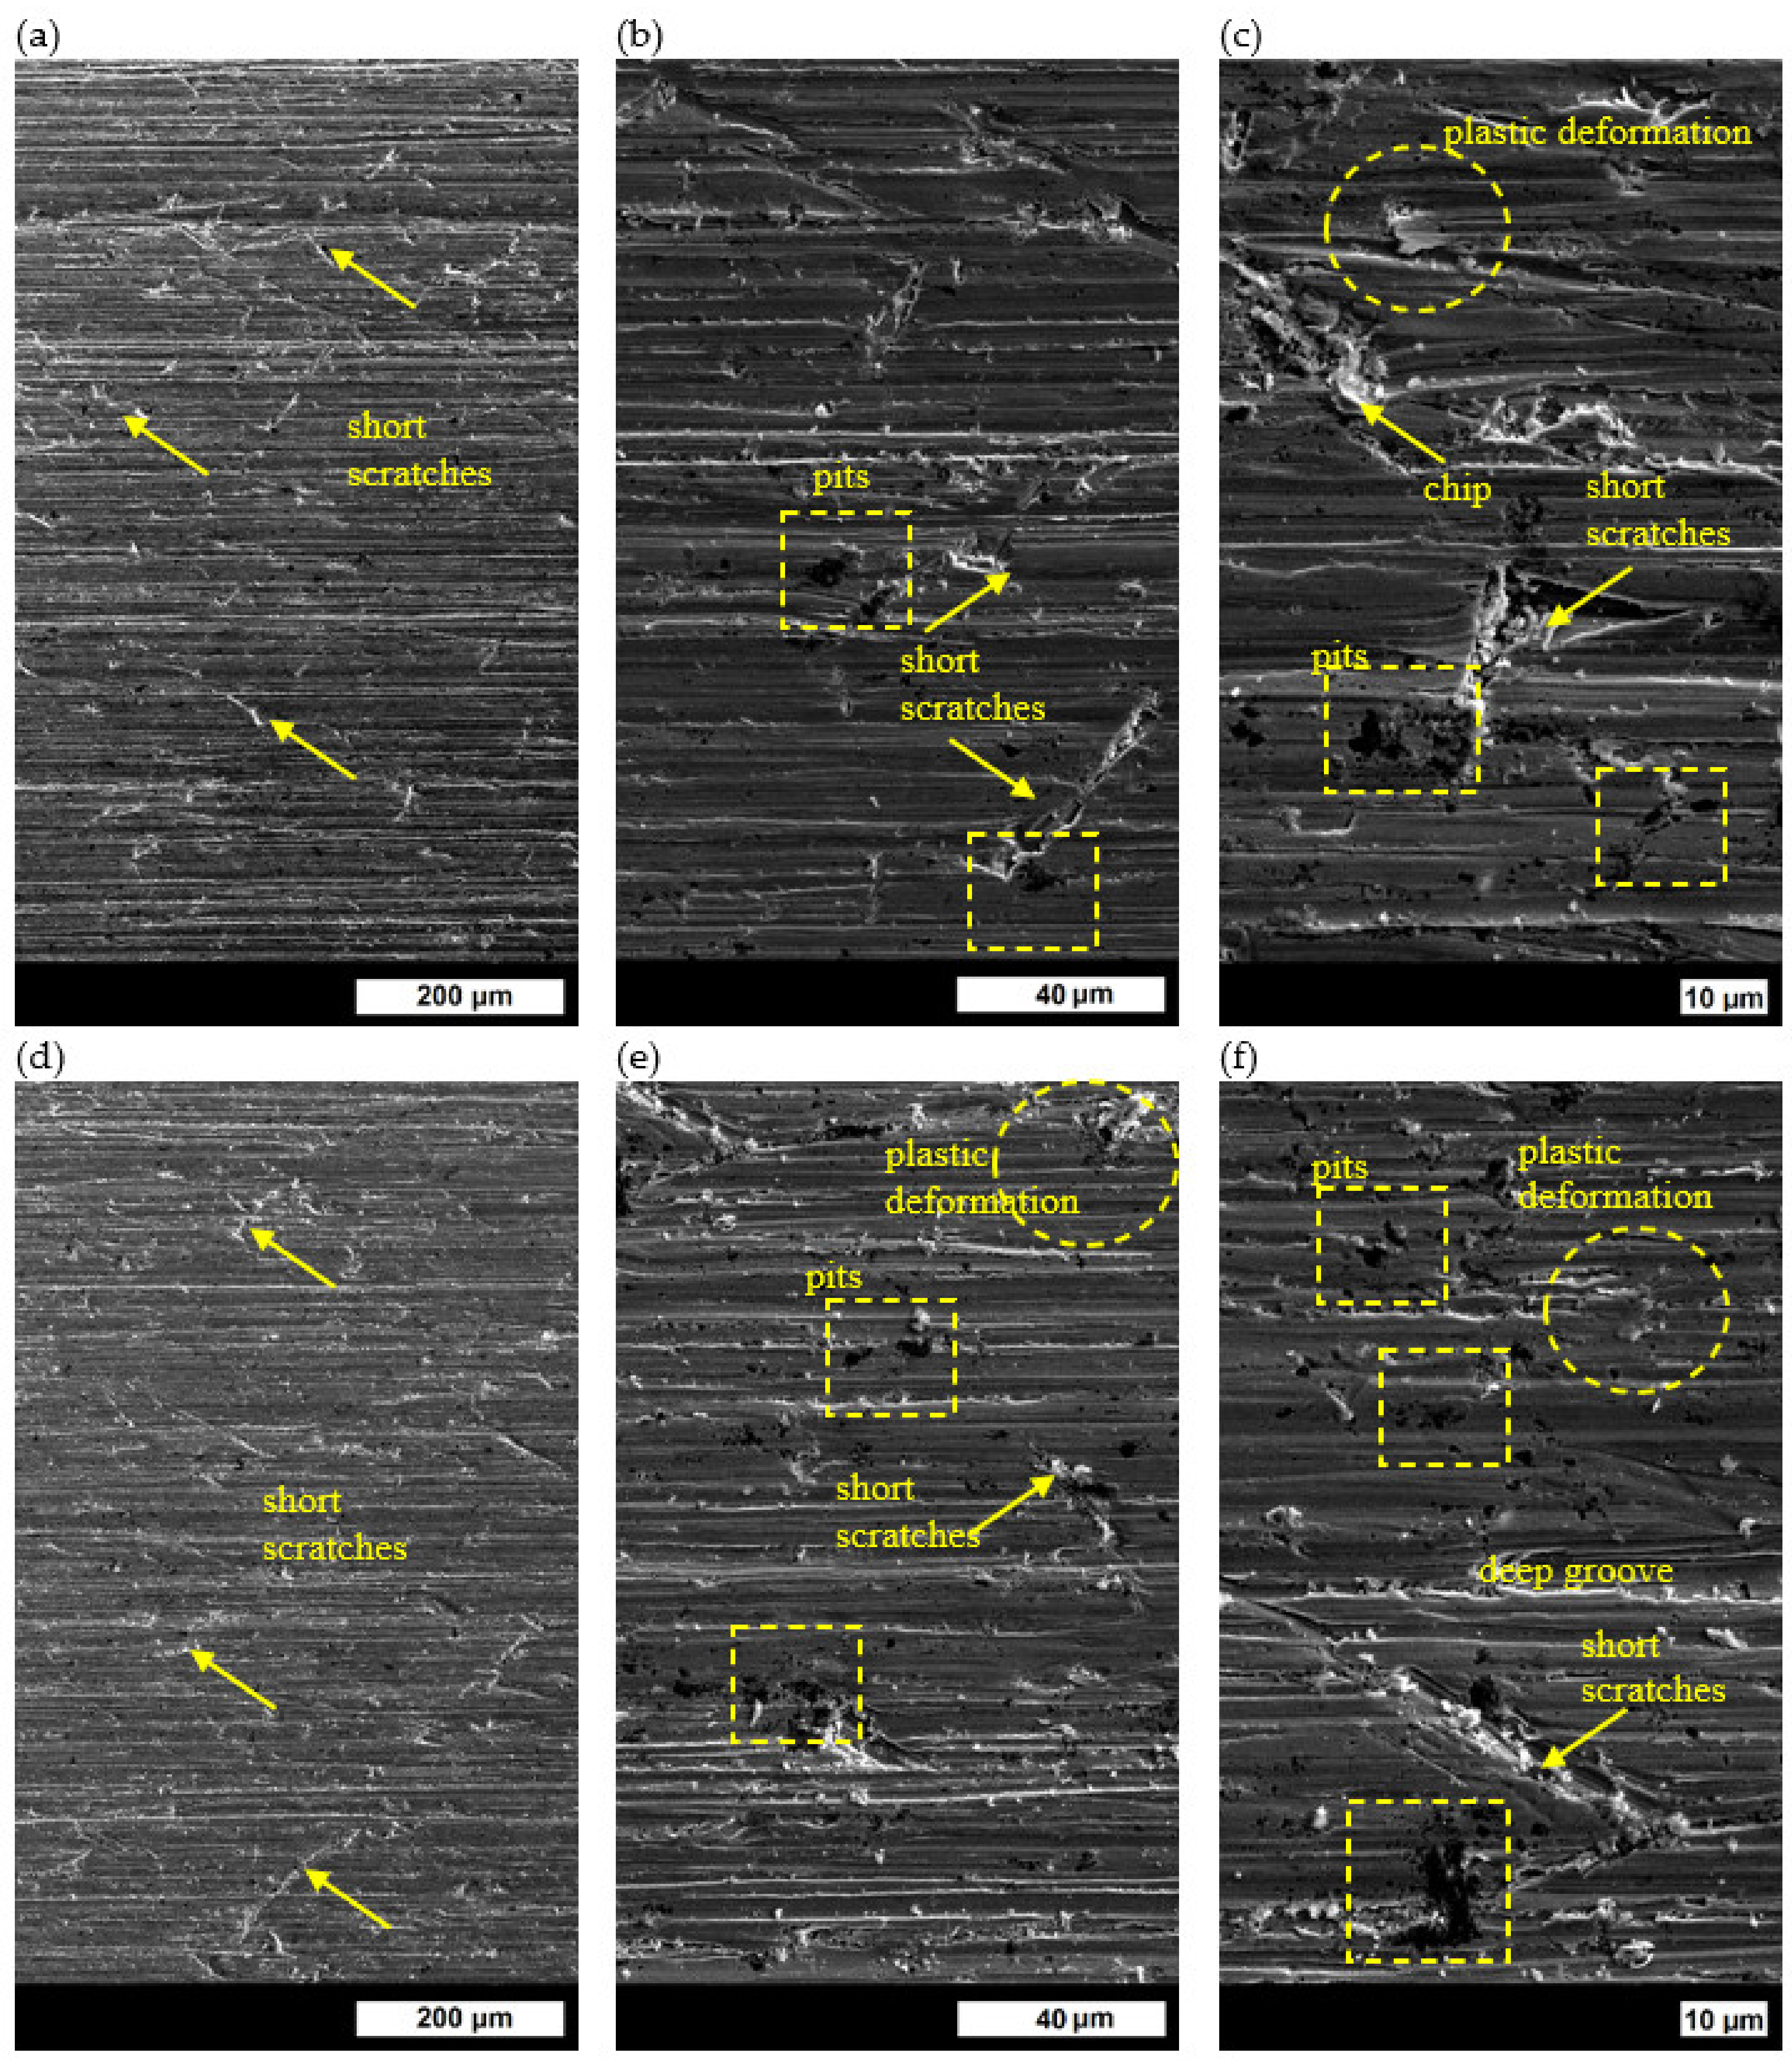 Three-body abrasion wear resistance of TiC-reinforced low-alloy abrasion- resistant martensitic steel under dry and wet sand conditions -  ScienceDirect